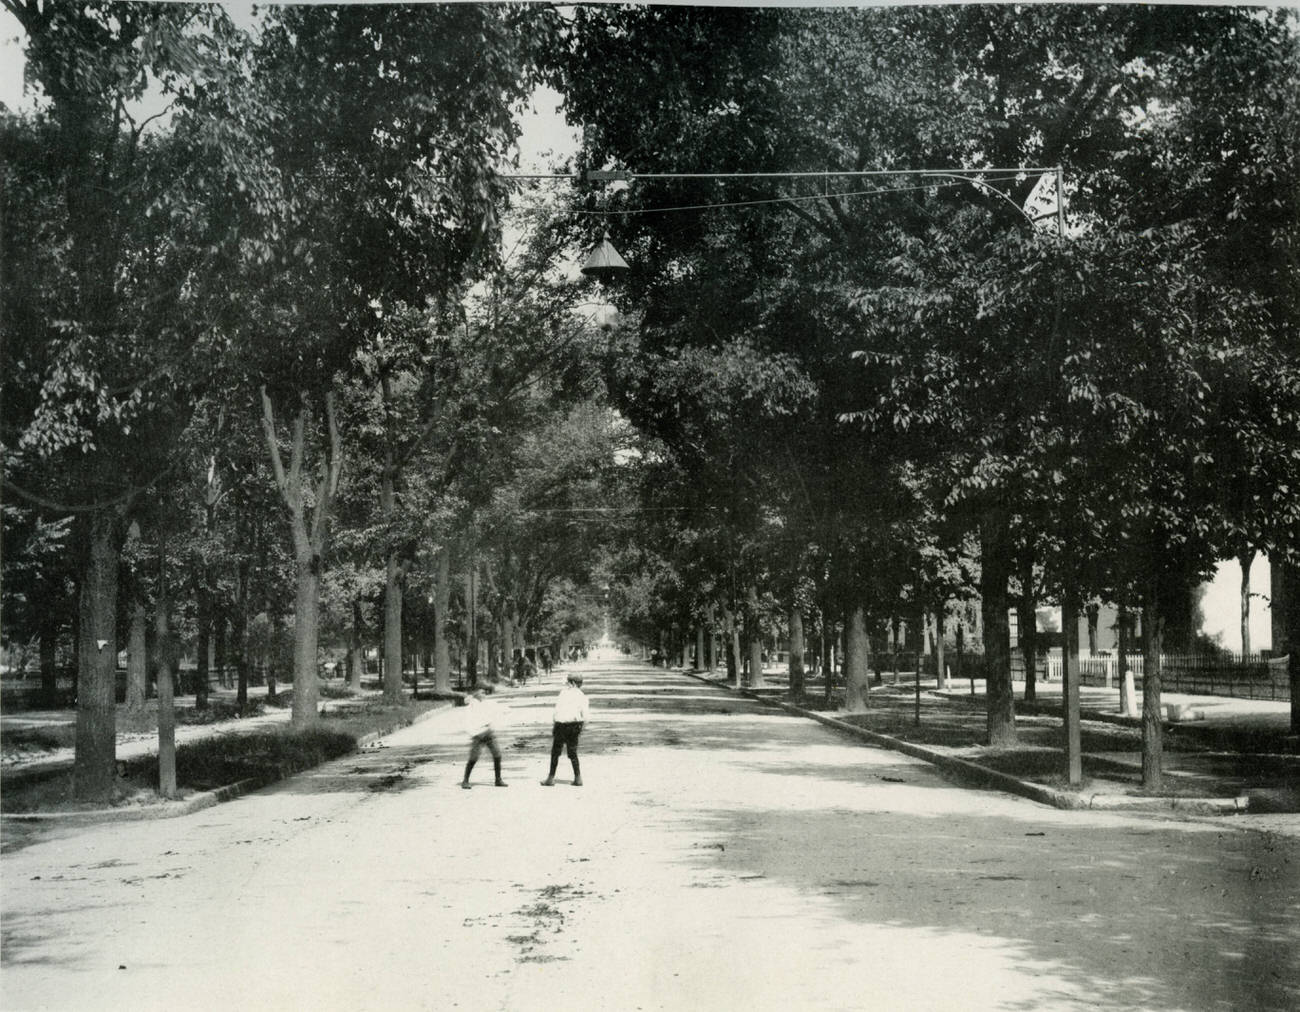 East Broad Street traffic in Columbus, photograph, 1897.